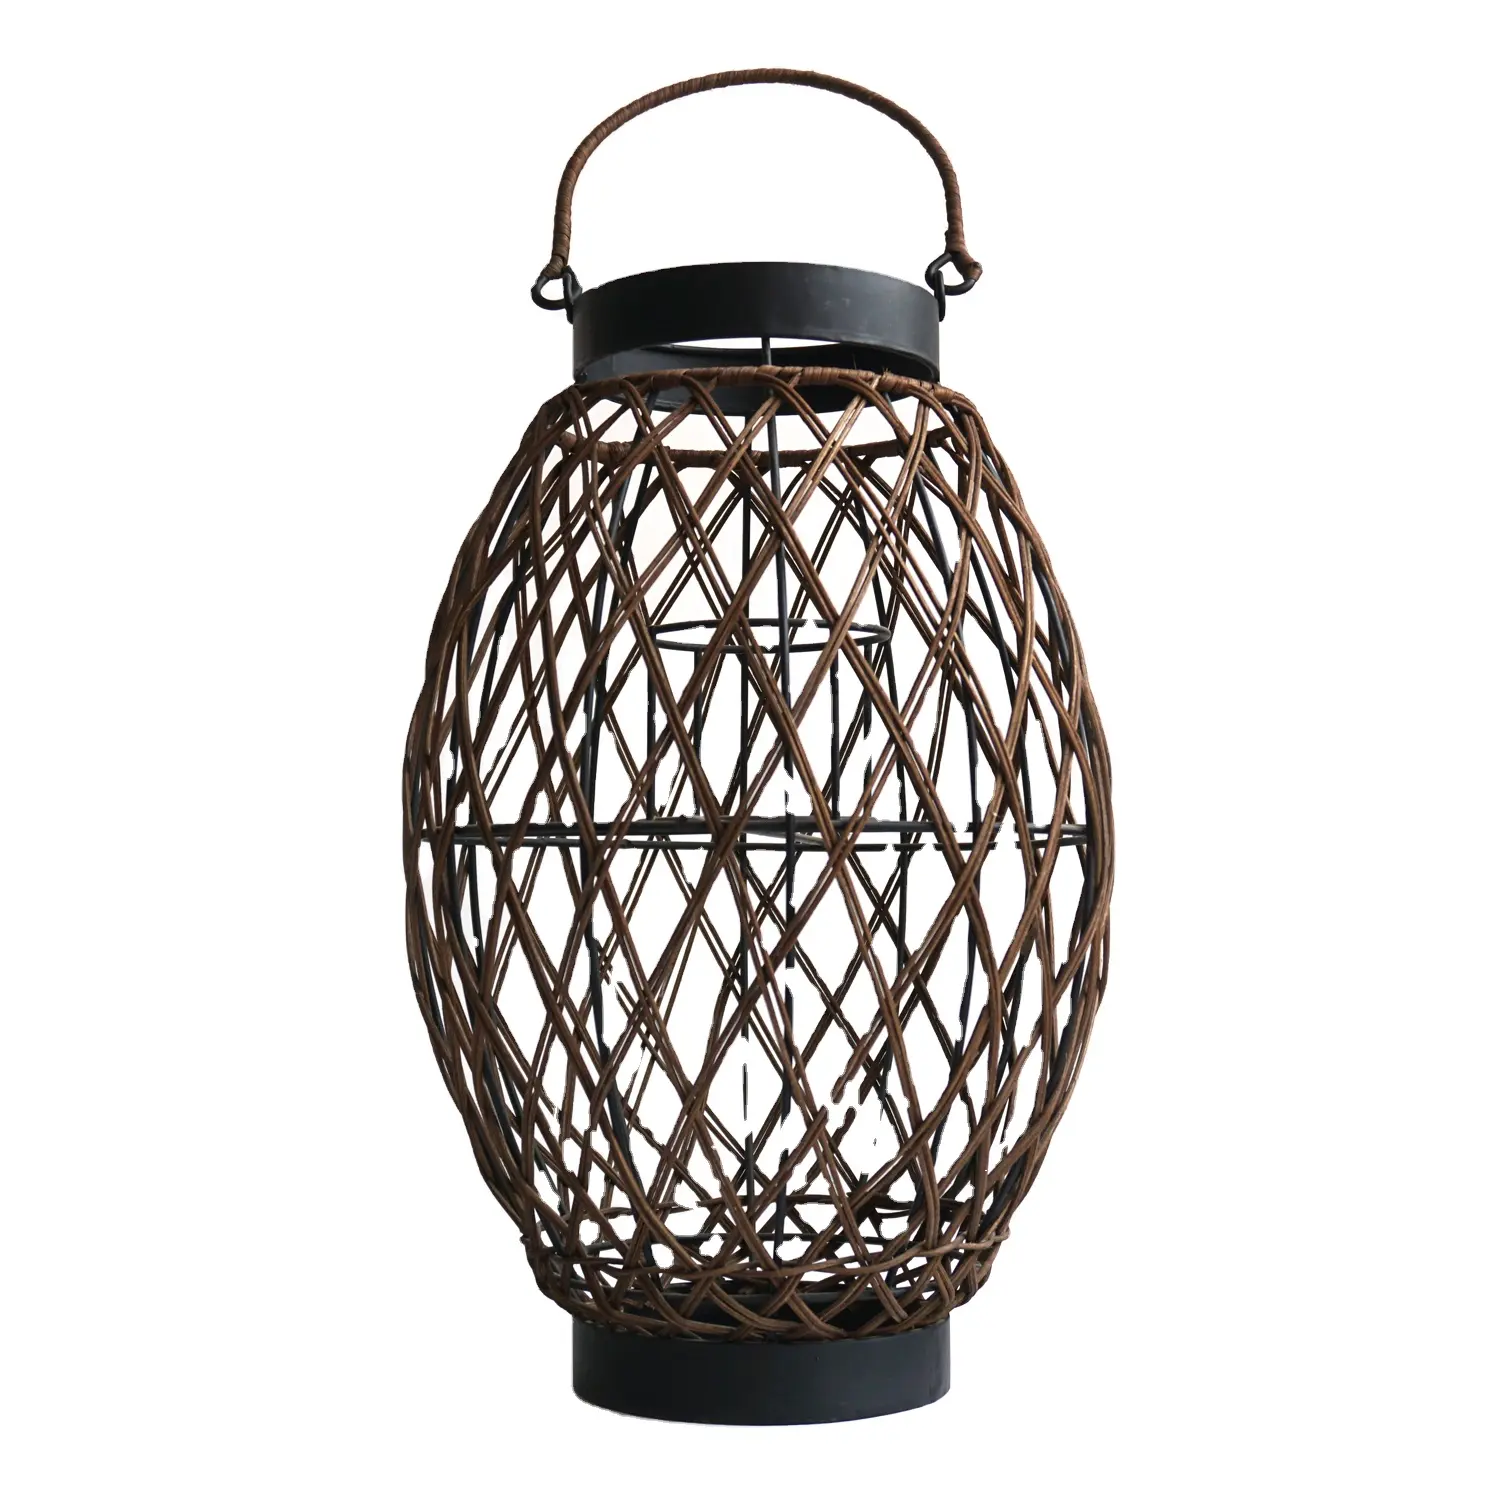 XH Wholesale factory organizer antique home decor lampshade handmade brown rattan resin wicker wind lamp with handle